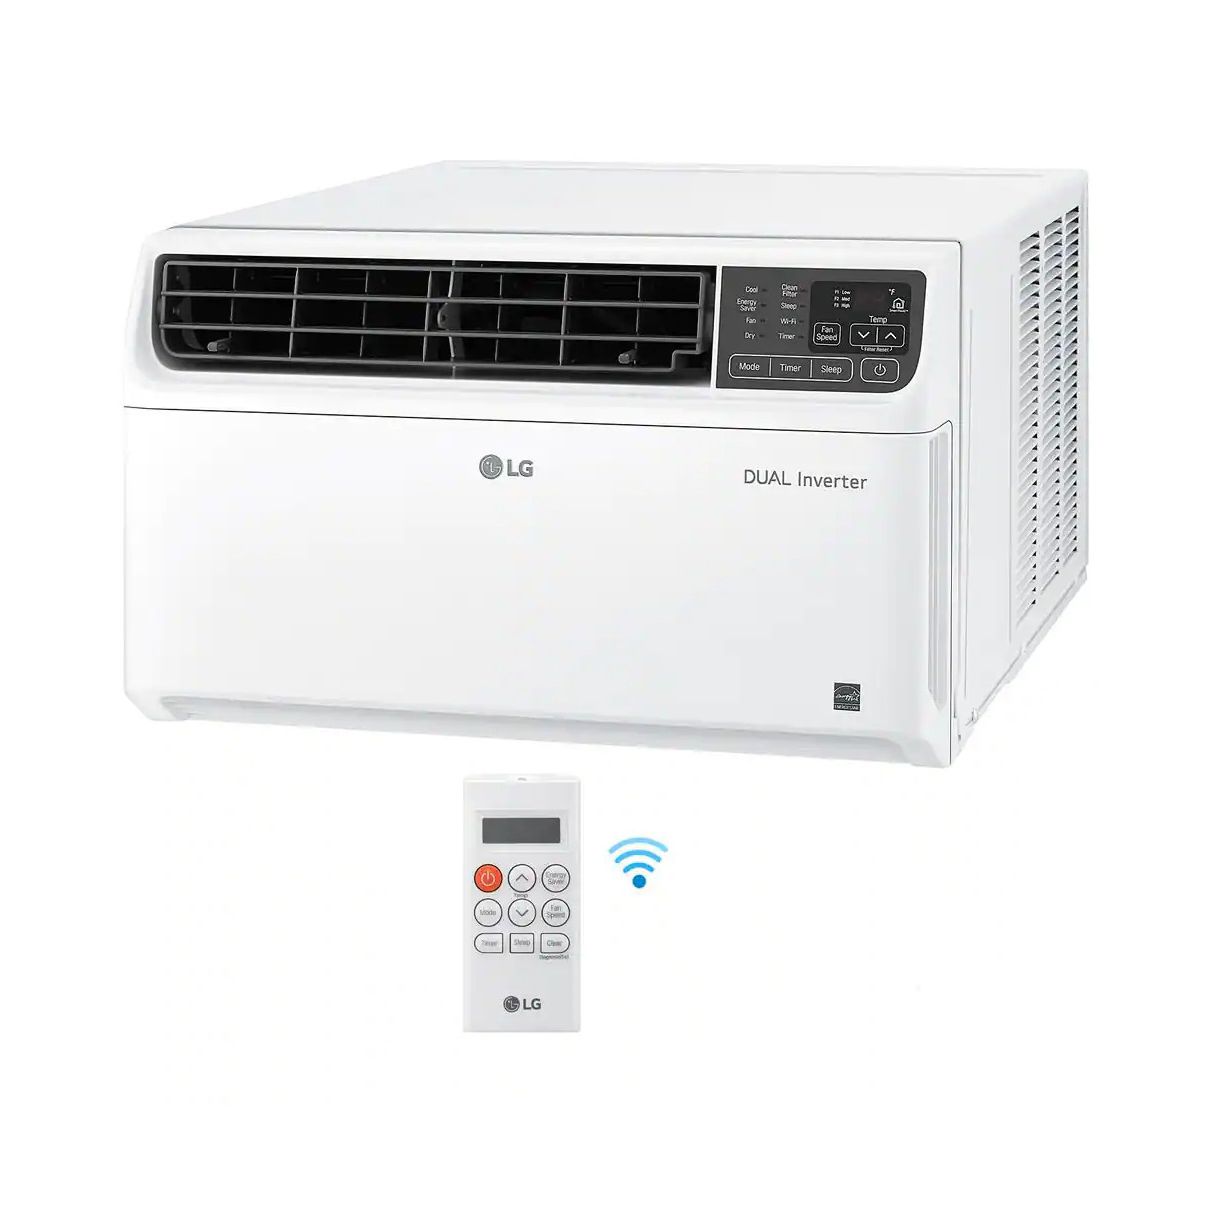 LG Electronics 18,000 BTU 230/208-Volt Dual Inverter Window Air Conditioner LW1817IVSM Cools 1,000 Sq Ft, Wi-Fi Enabled with Remote